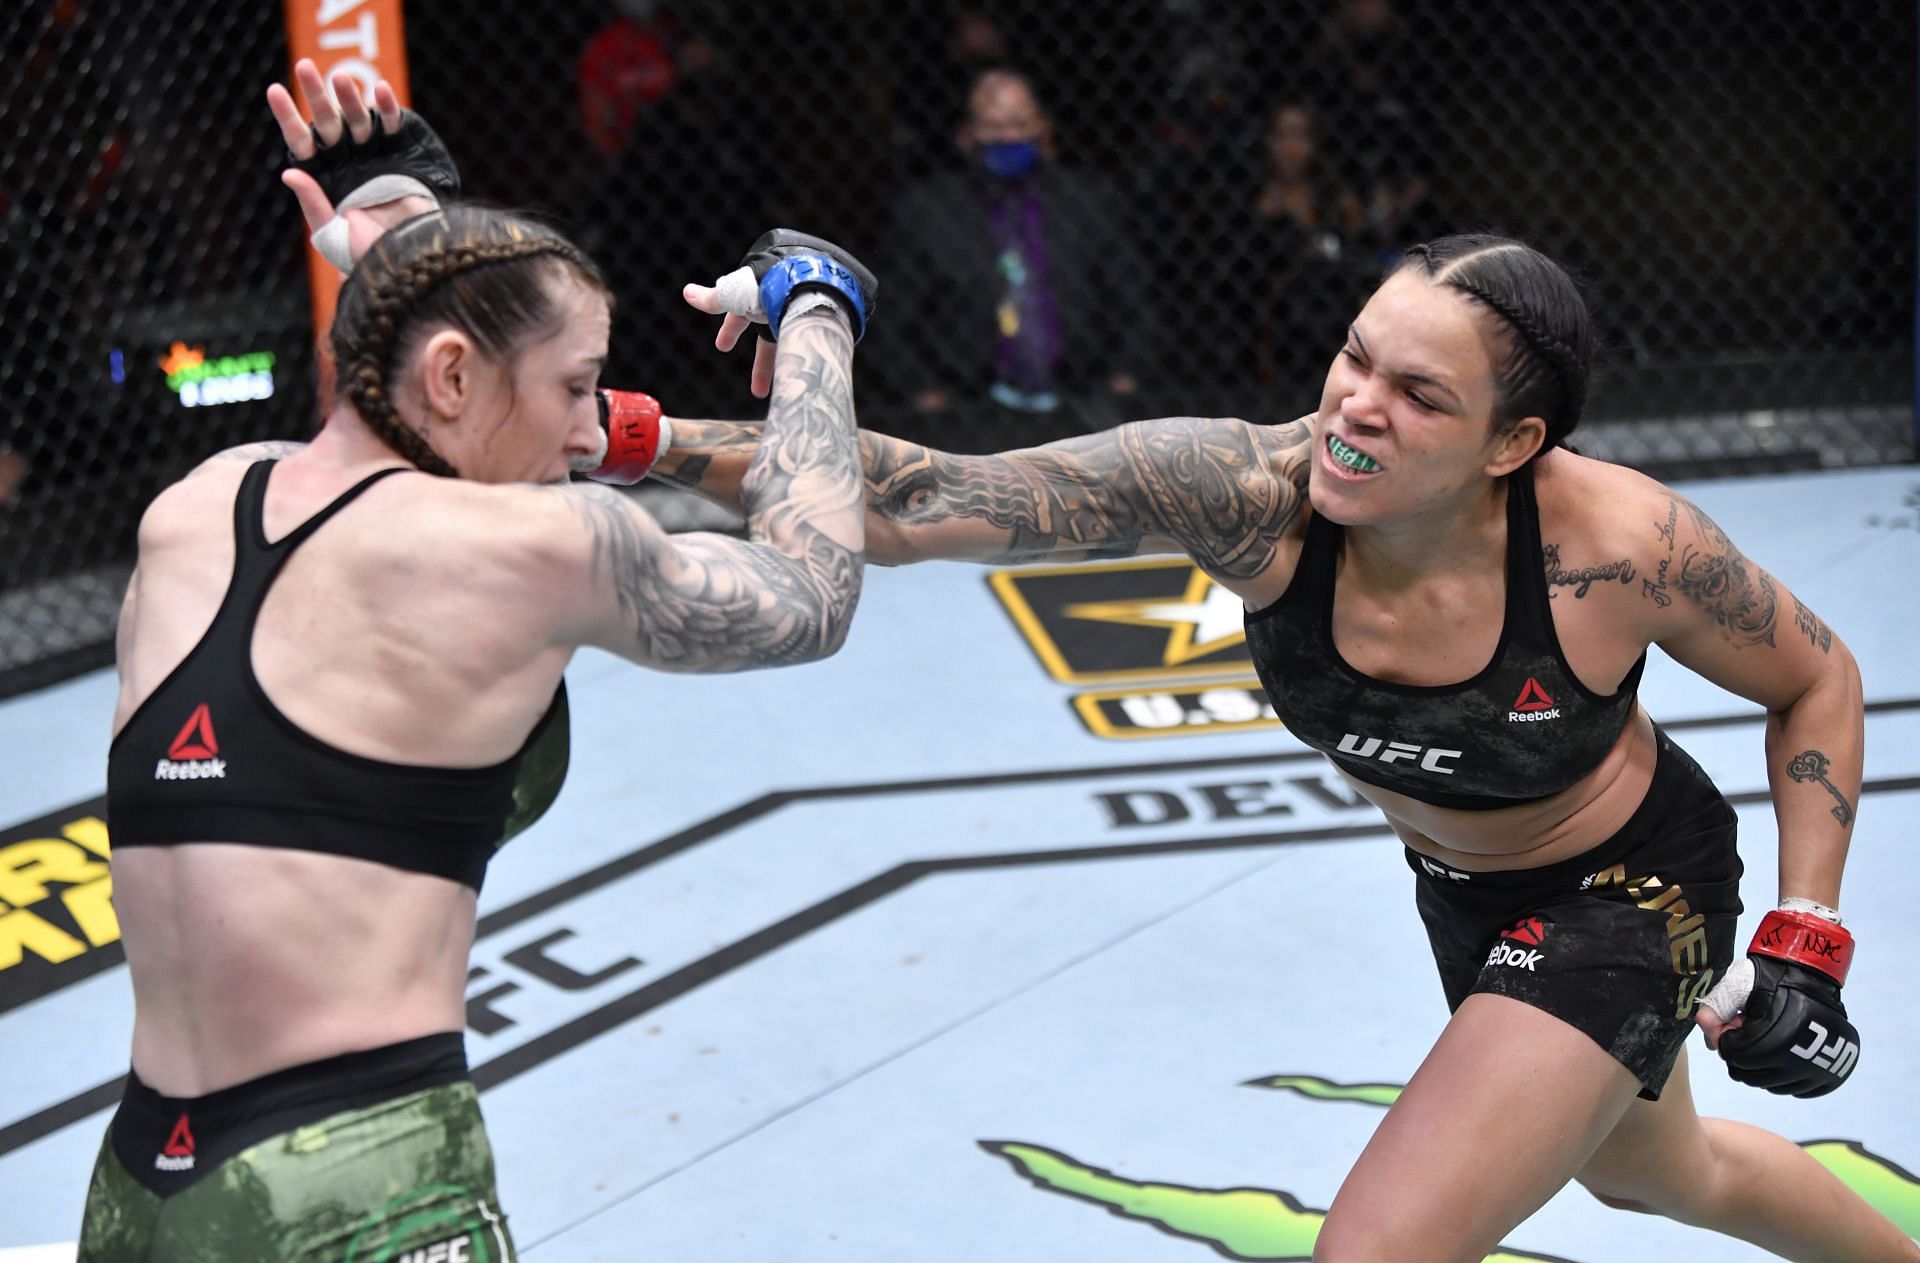 Amanda Nunes scored her ninth first-round finish in her most recent fight